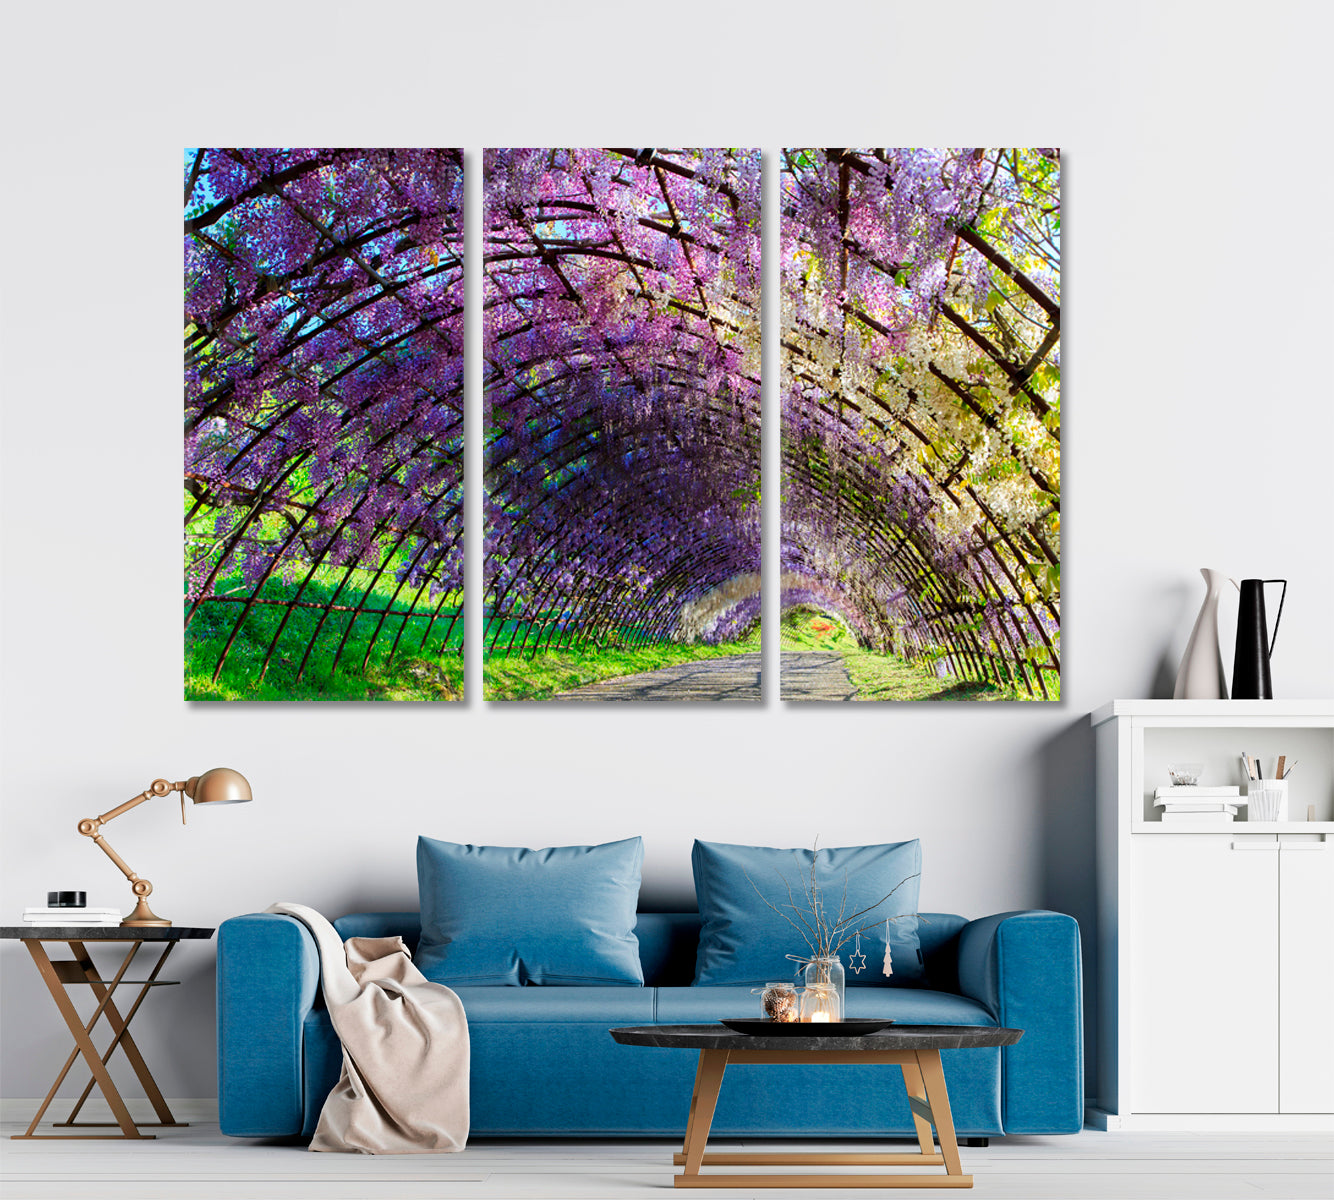 WISTERIA The Great Wisteria Flower Tunnel in Japan Magical Place in Spring Japan Floral & Botanical Split Art Artesty   